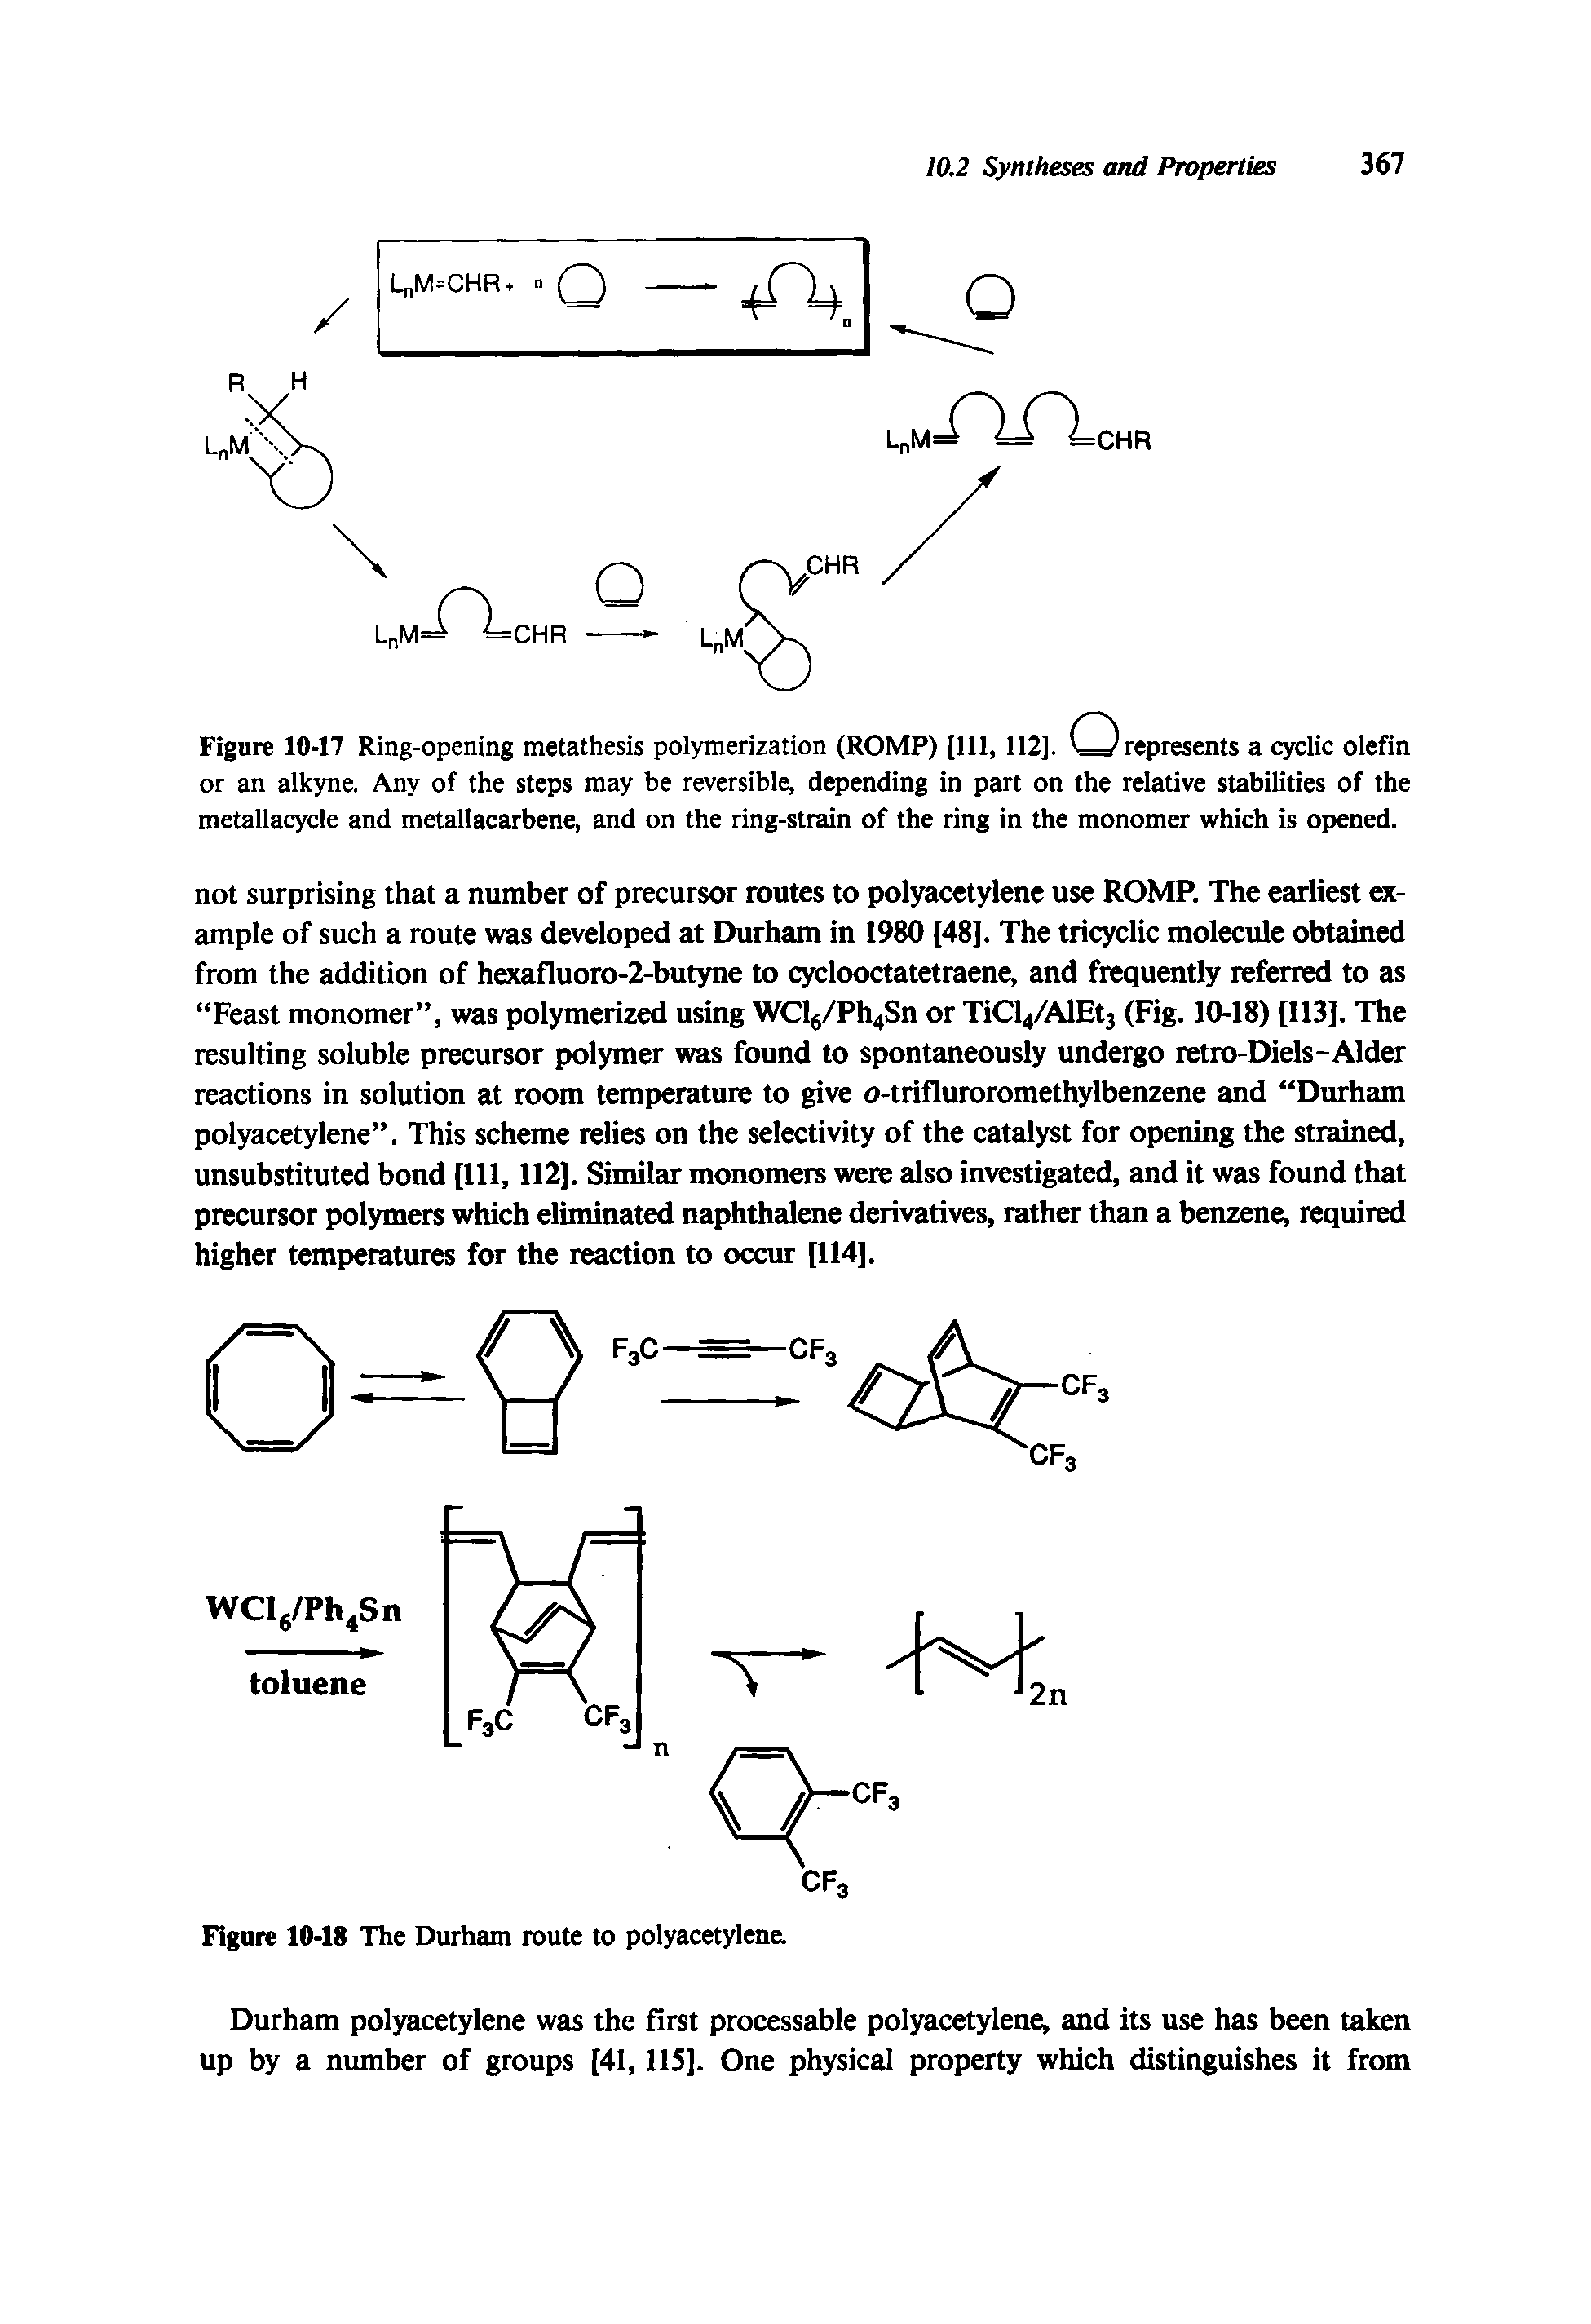 Figure 10-17 Ring-opening metathesis polymerization (ROMP) [111, 112]. represents a cyclic olefin or an alkyne. Any of the steps may be reversible, depending in part on the relative stabilities of the metallacycle and metallacarbene, and on the ring-strain of the ring in the monomer which is opened.